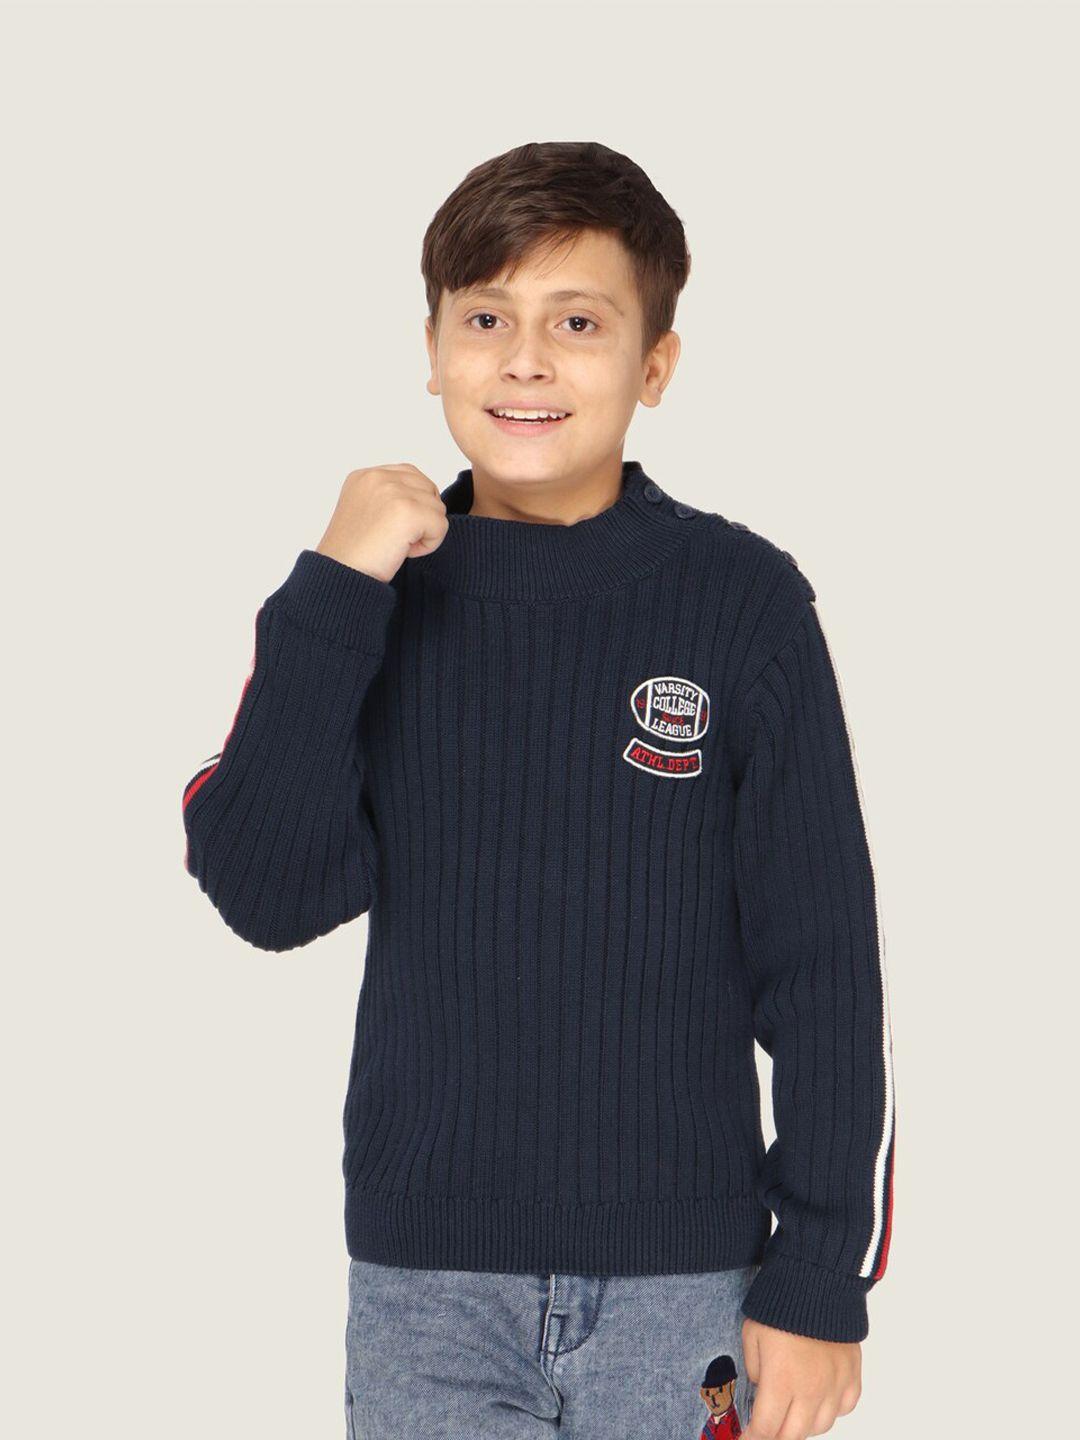 lasnak boys navy blue & white ribbed pullover cotton pullover sweater